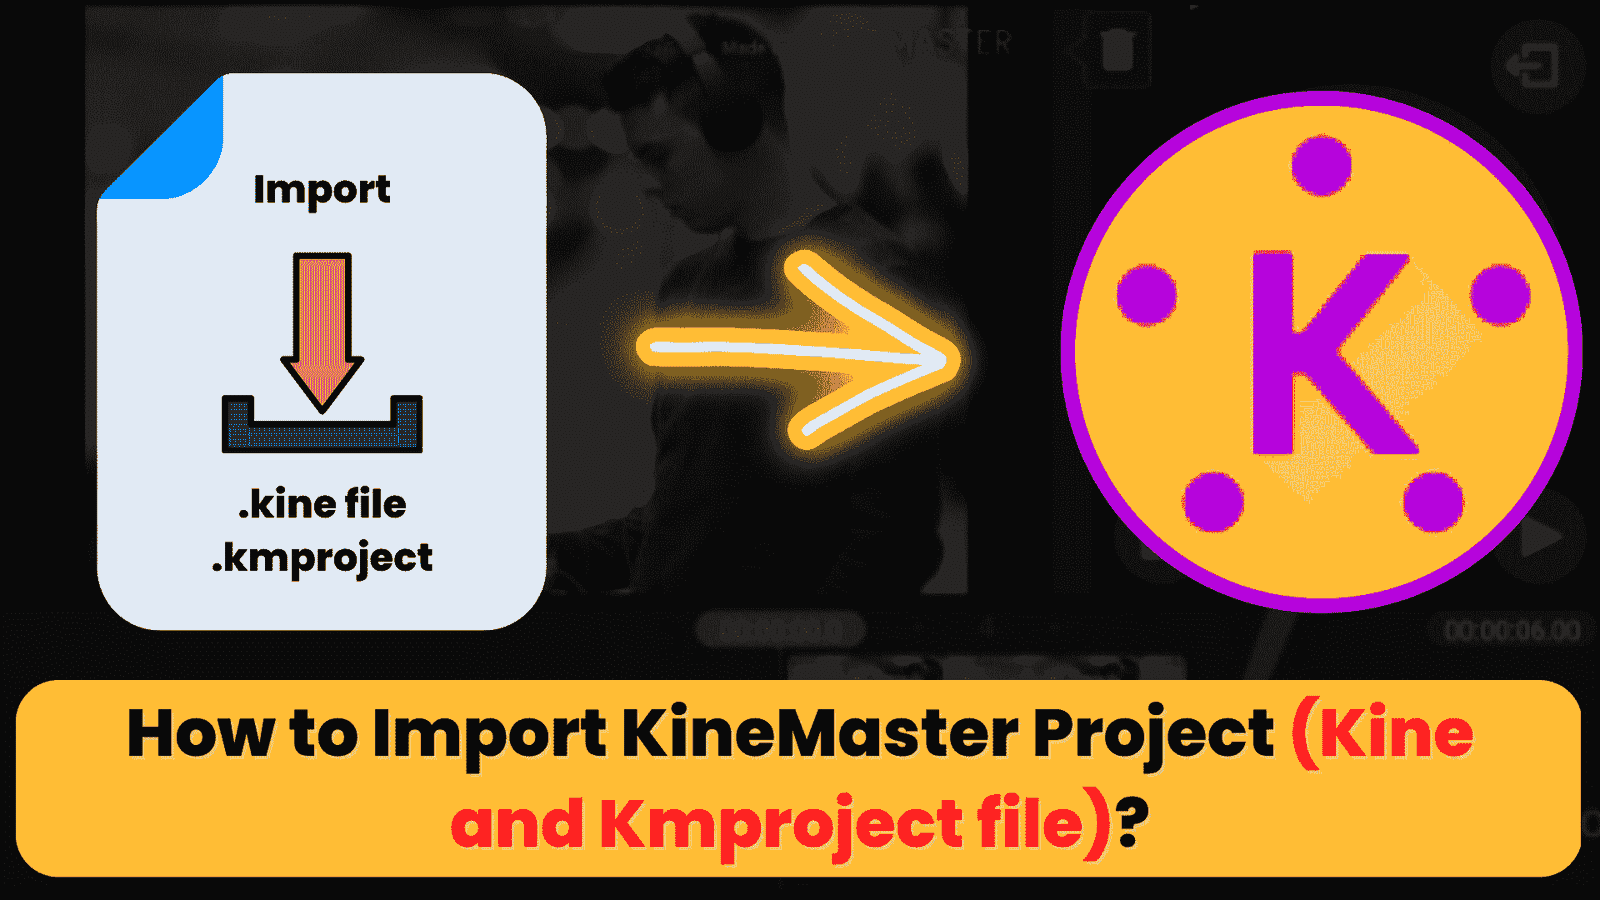 How to Import KineMaster Project (Kine and Kmproject file)